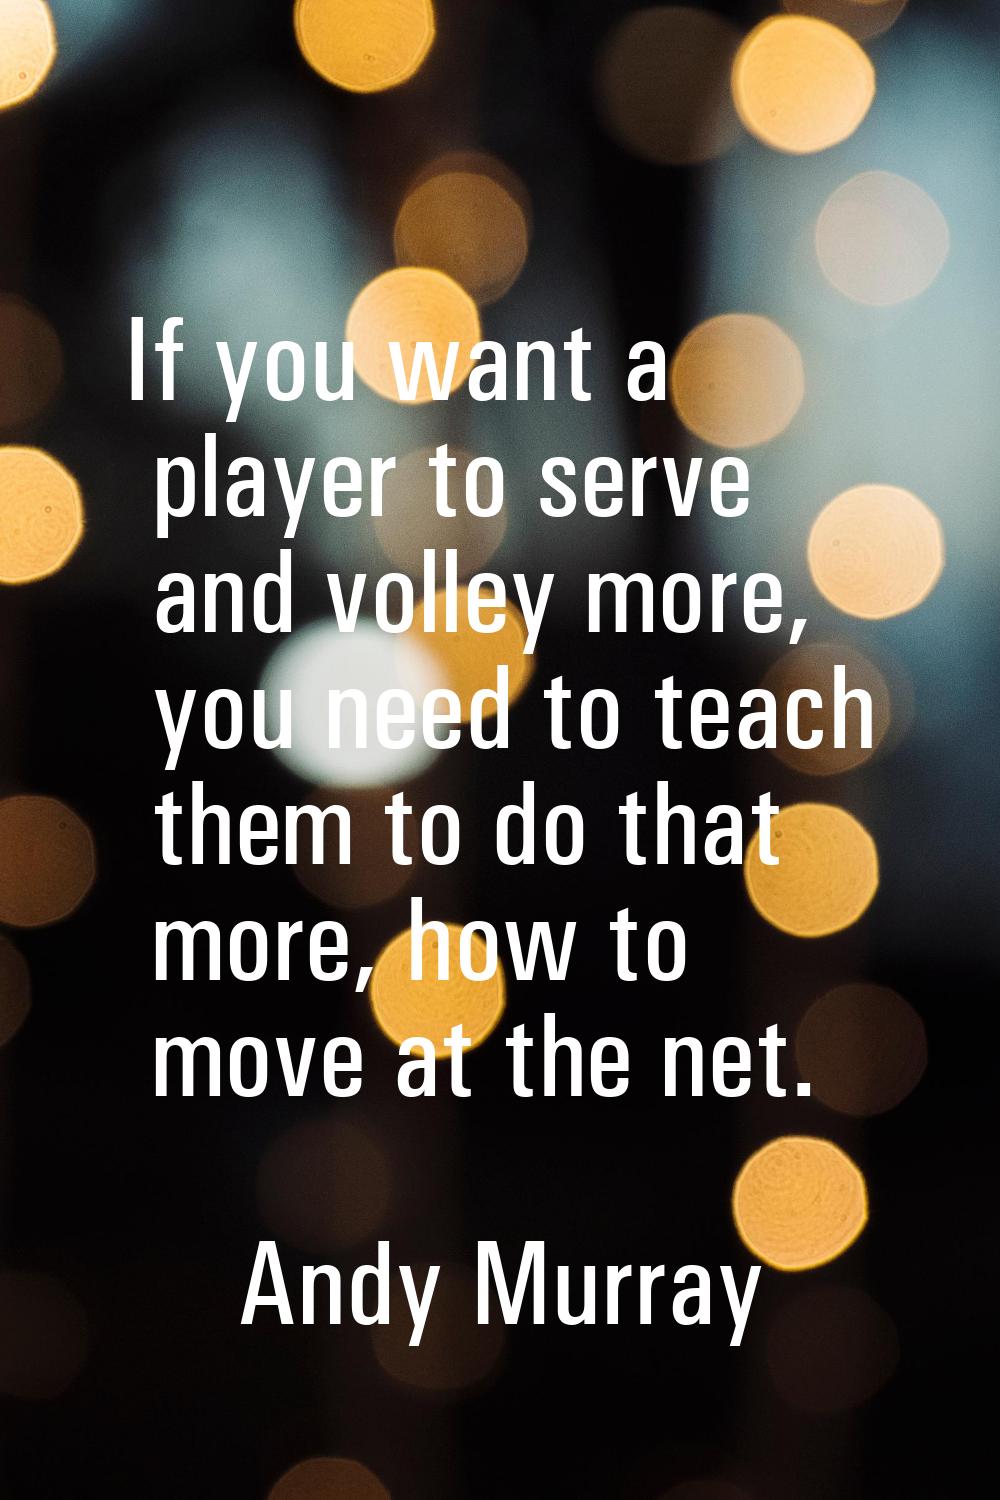 If you want a player to serve and volley more, you need to teach them to do that more, how to move 